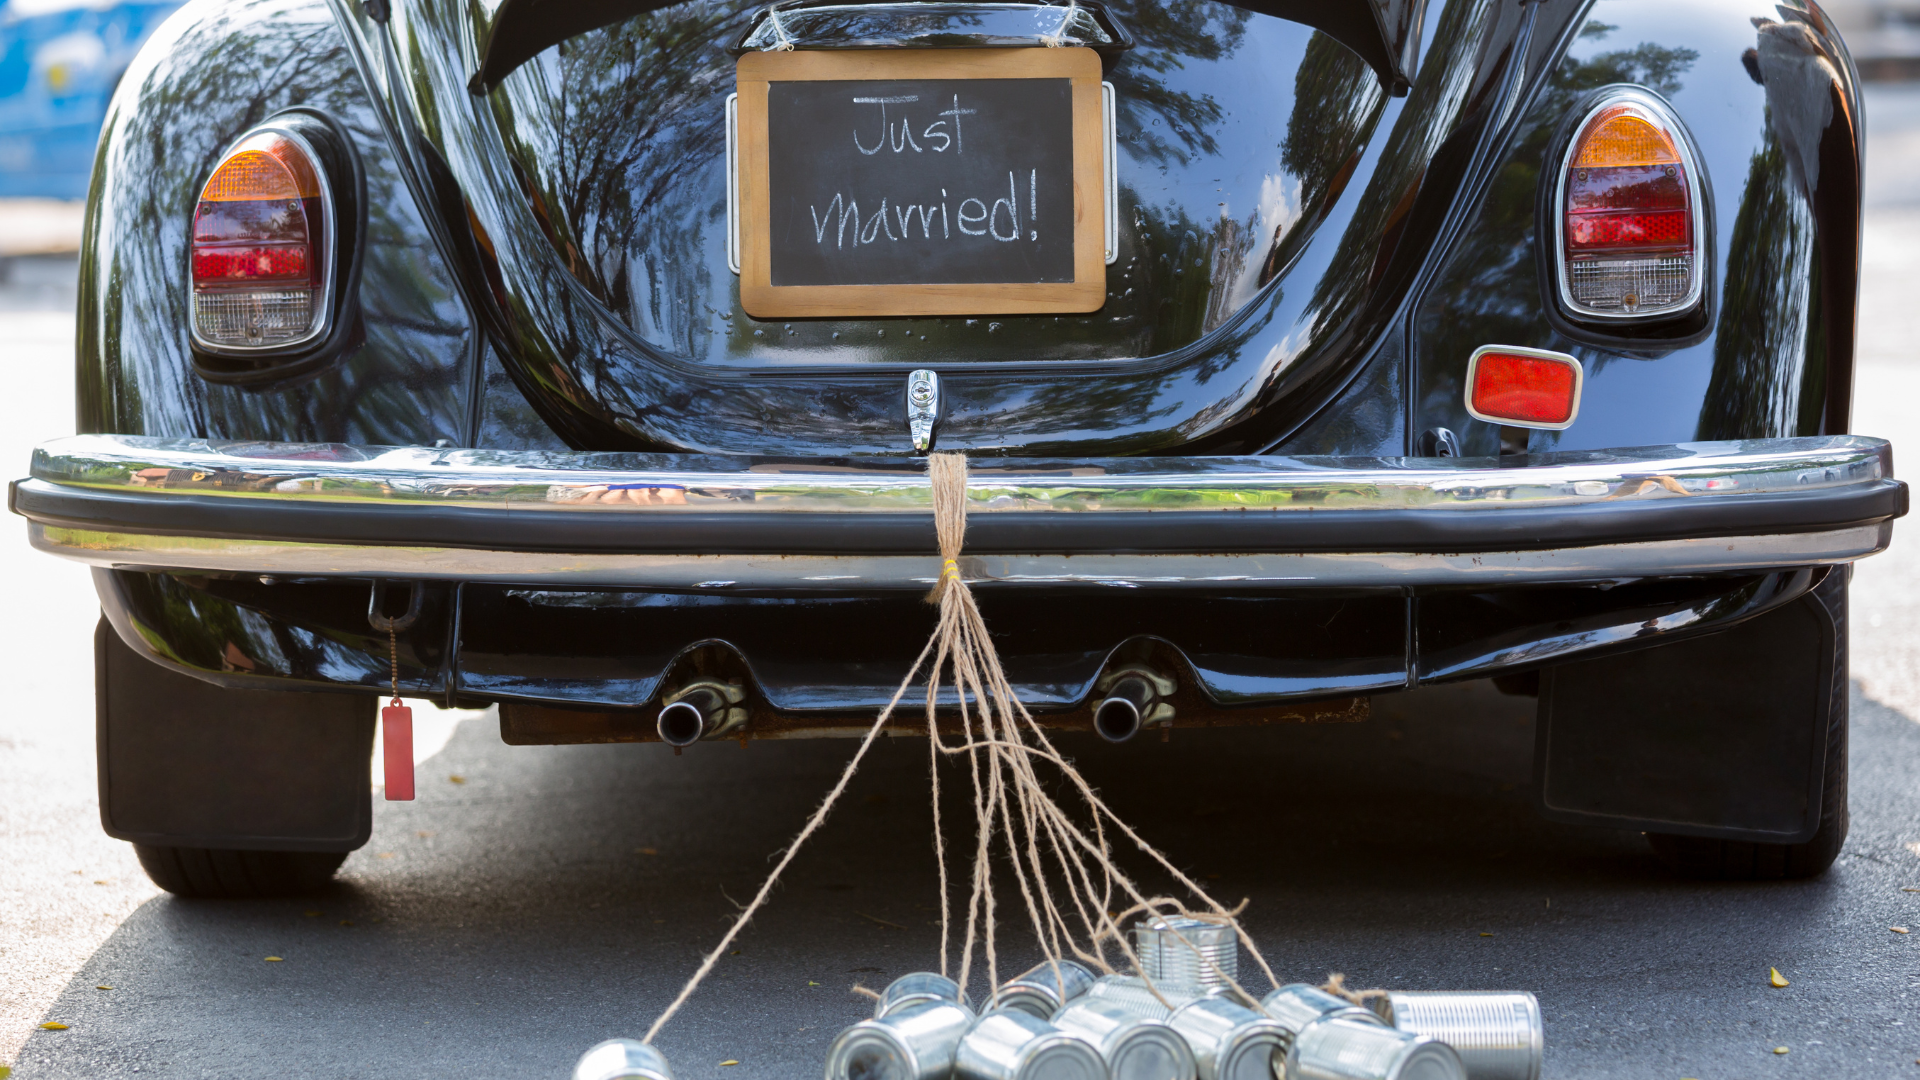 A black vintage car is ready to drive away, with a chalkboard "Just Married" sign and a bundle of tin cans affixed to the back